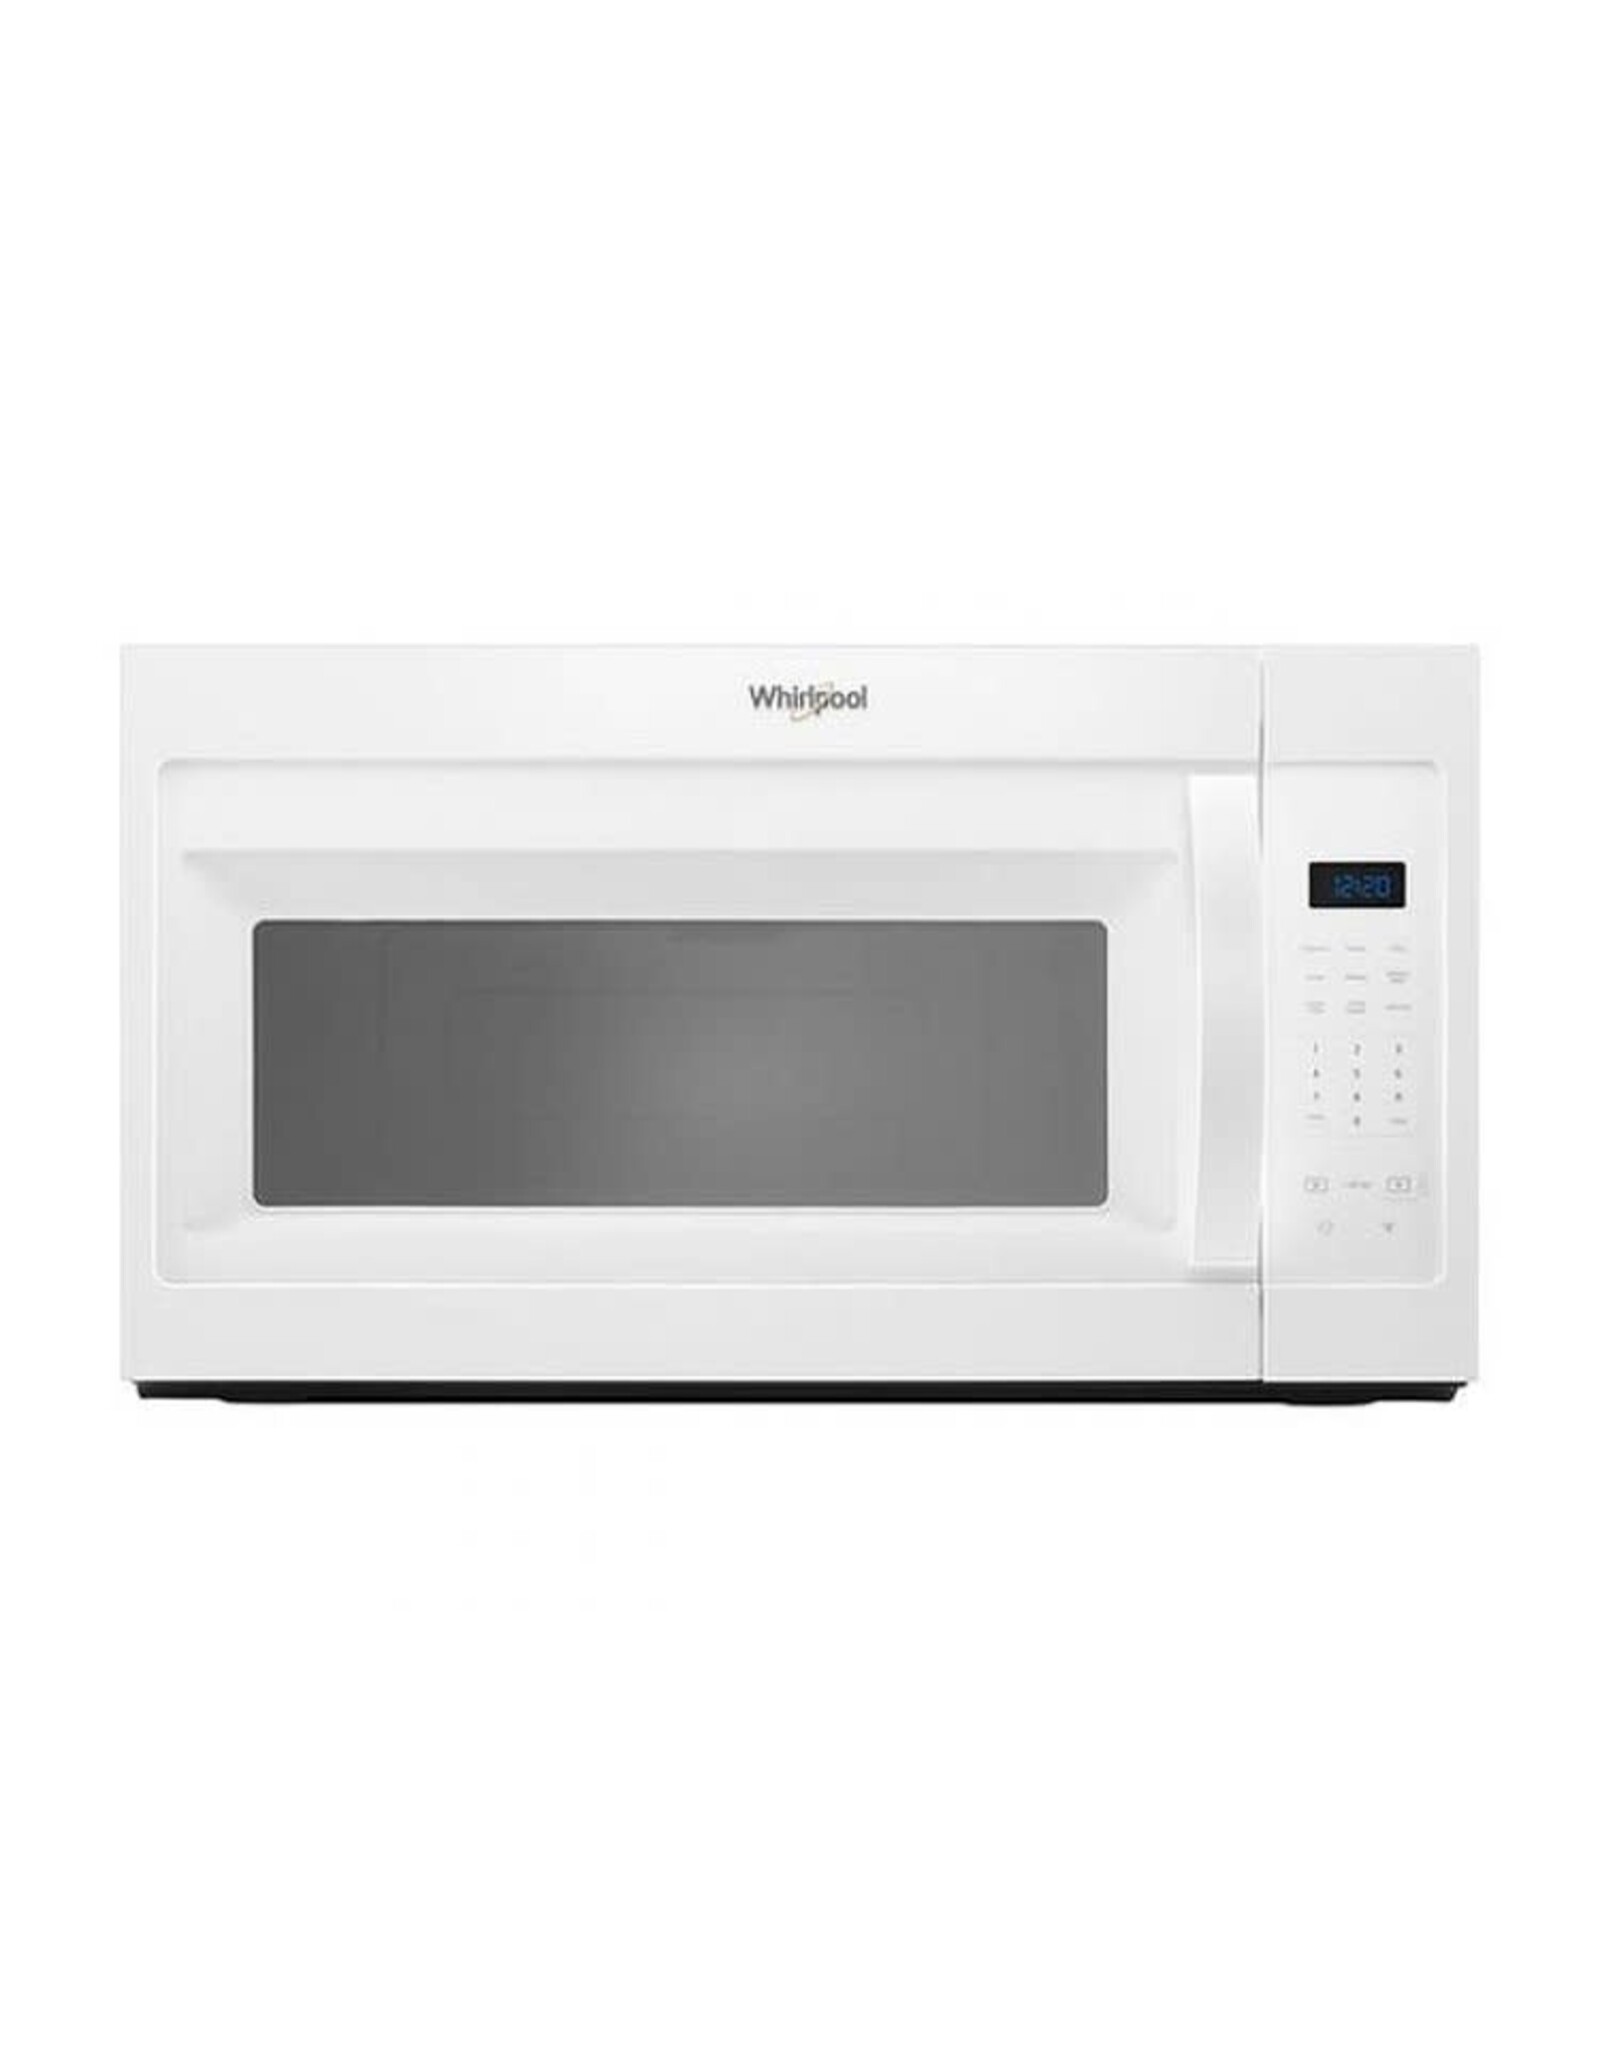 WMH31017HW WHR Microwave, Hood, Combination – 1.7 CU FT, 1000 WATTS, 2-PIECE FRONT, S